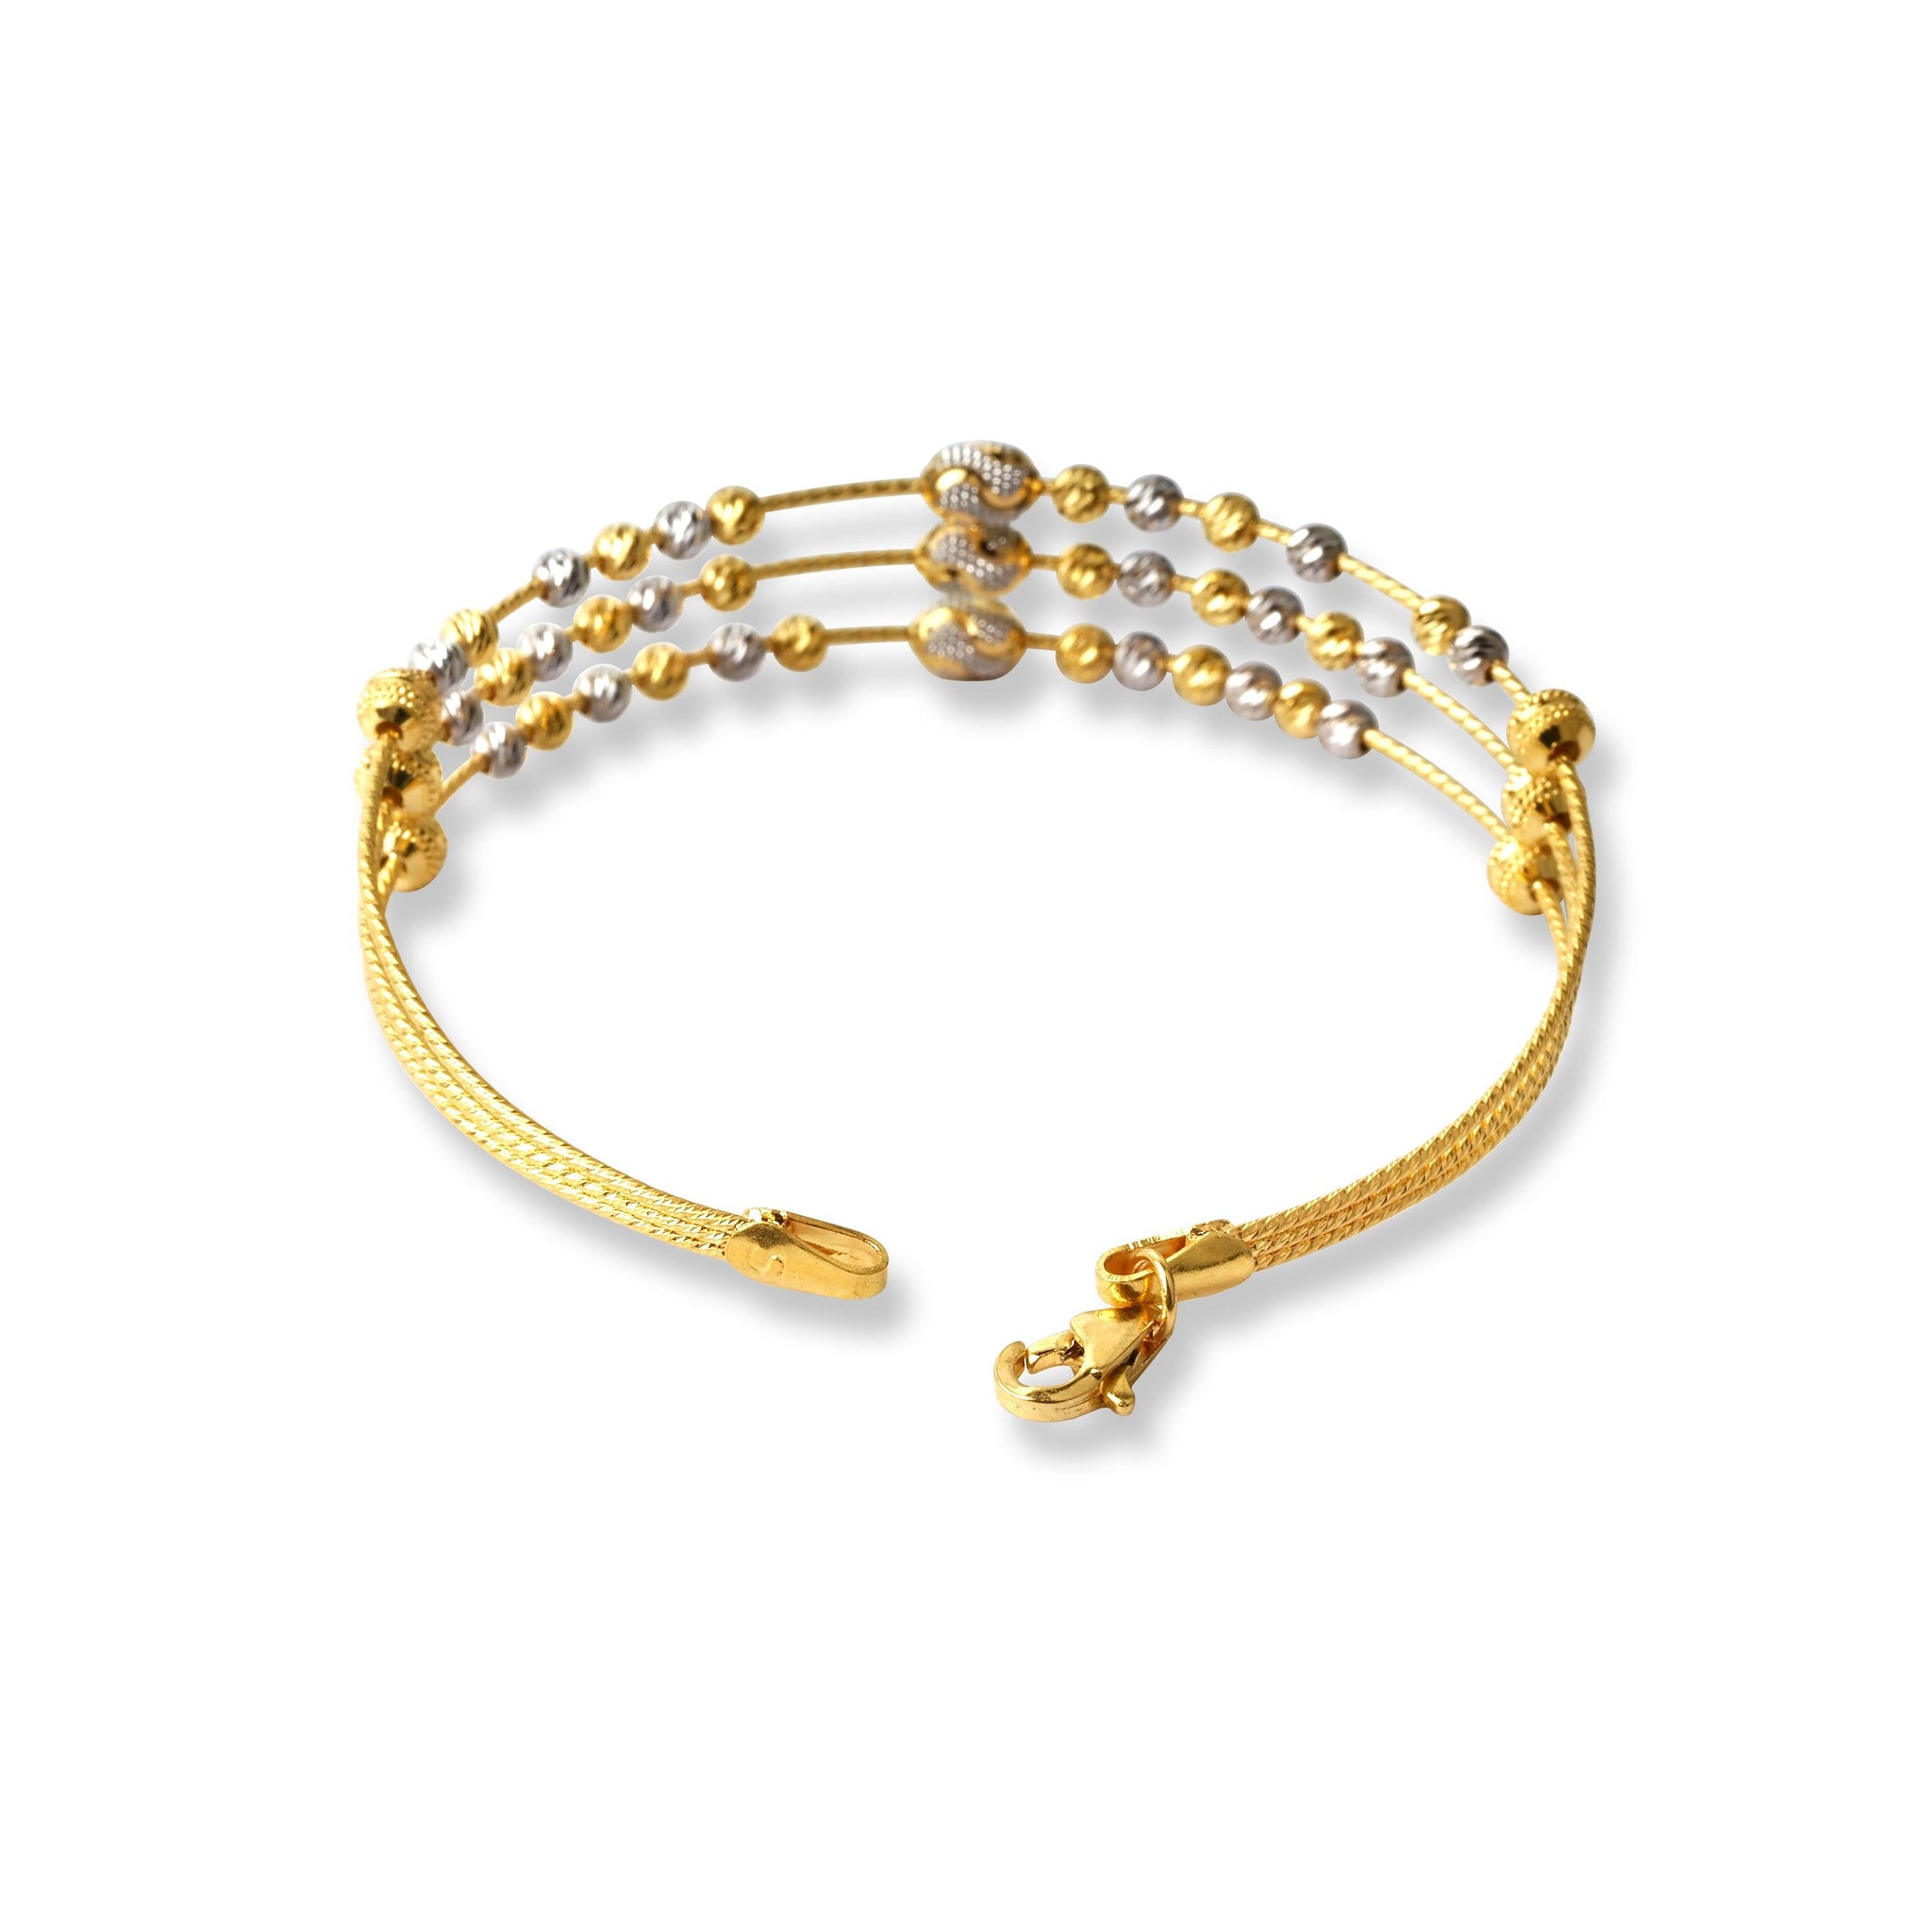 22ct Gold Rhodium Plated Beads Bangle With Rounded Trigger Clasp (11.2g) B-8502